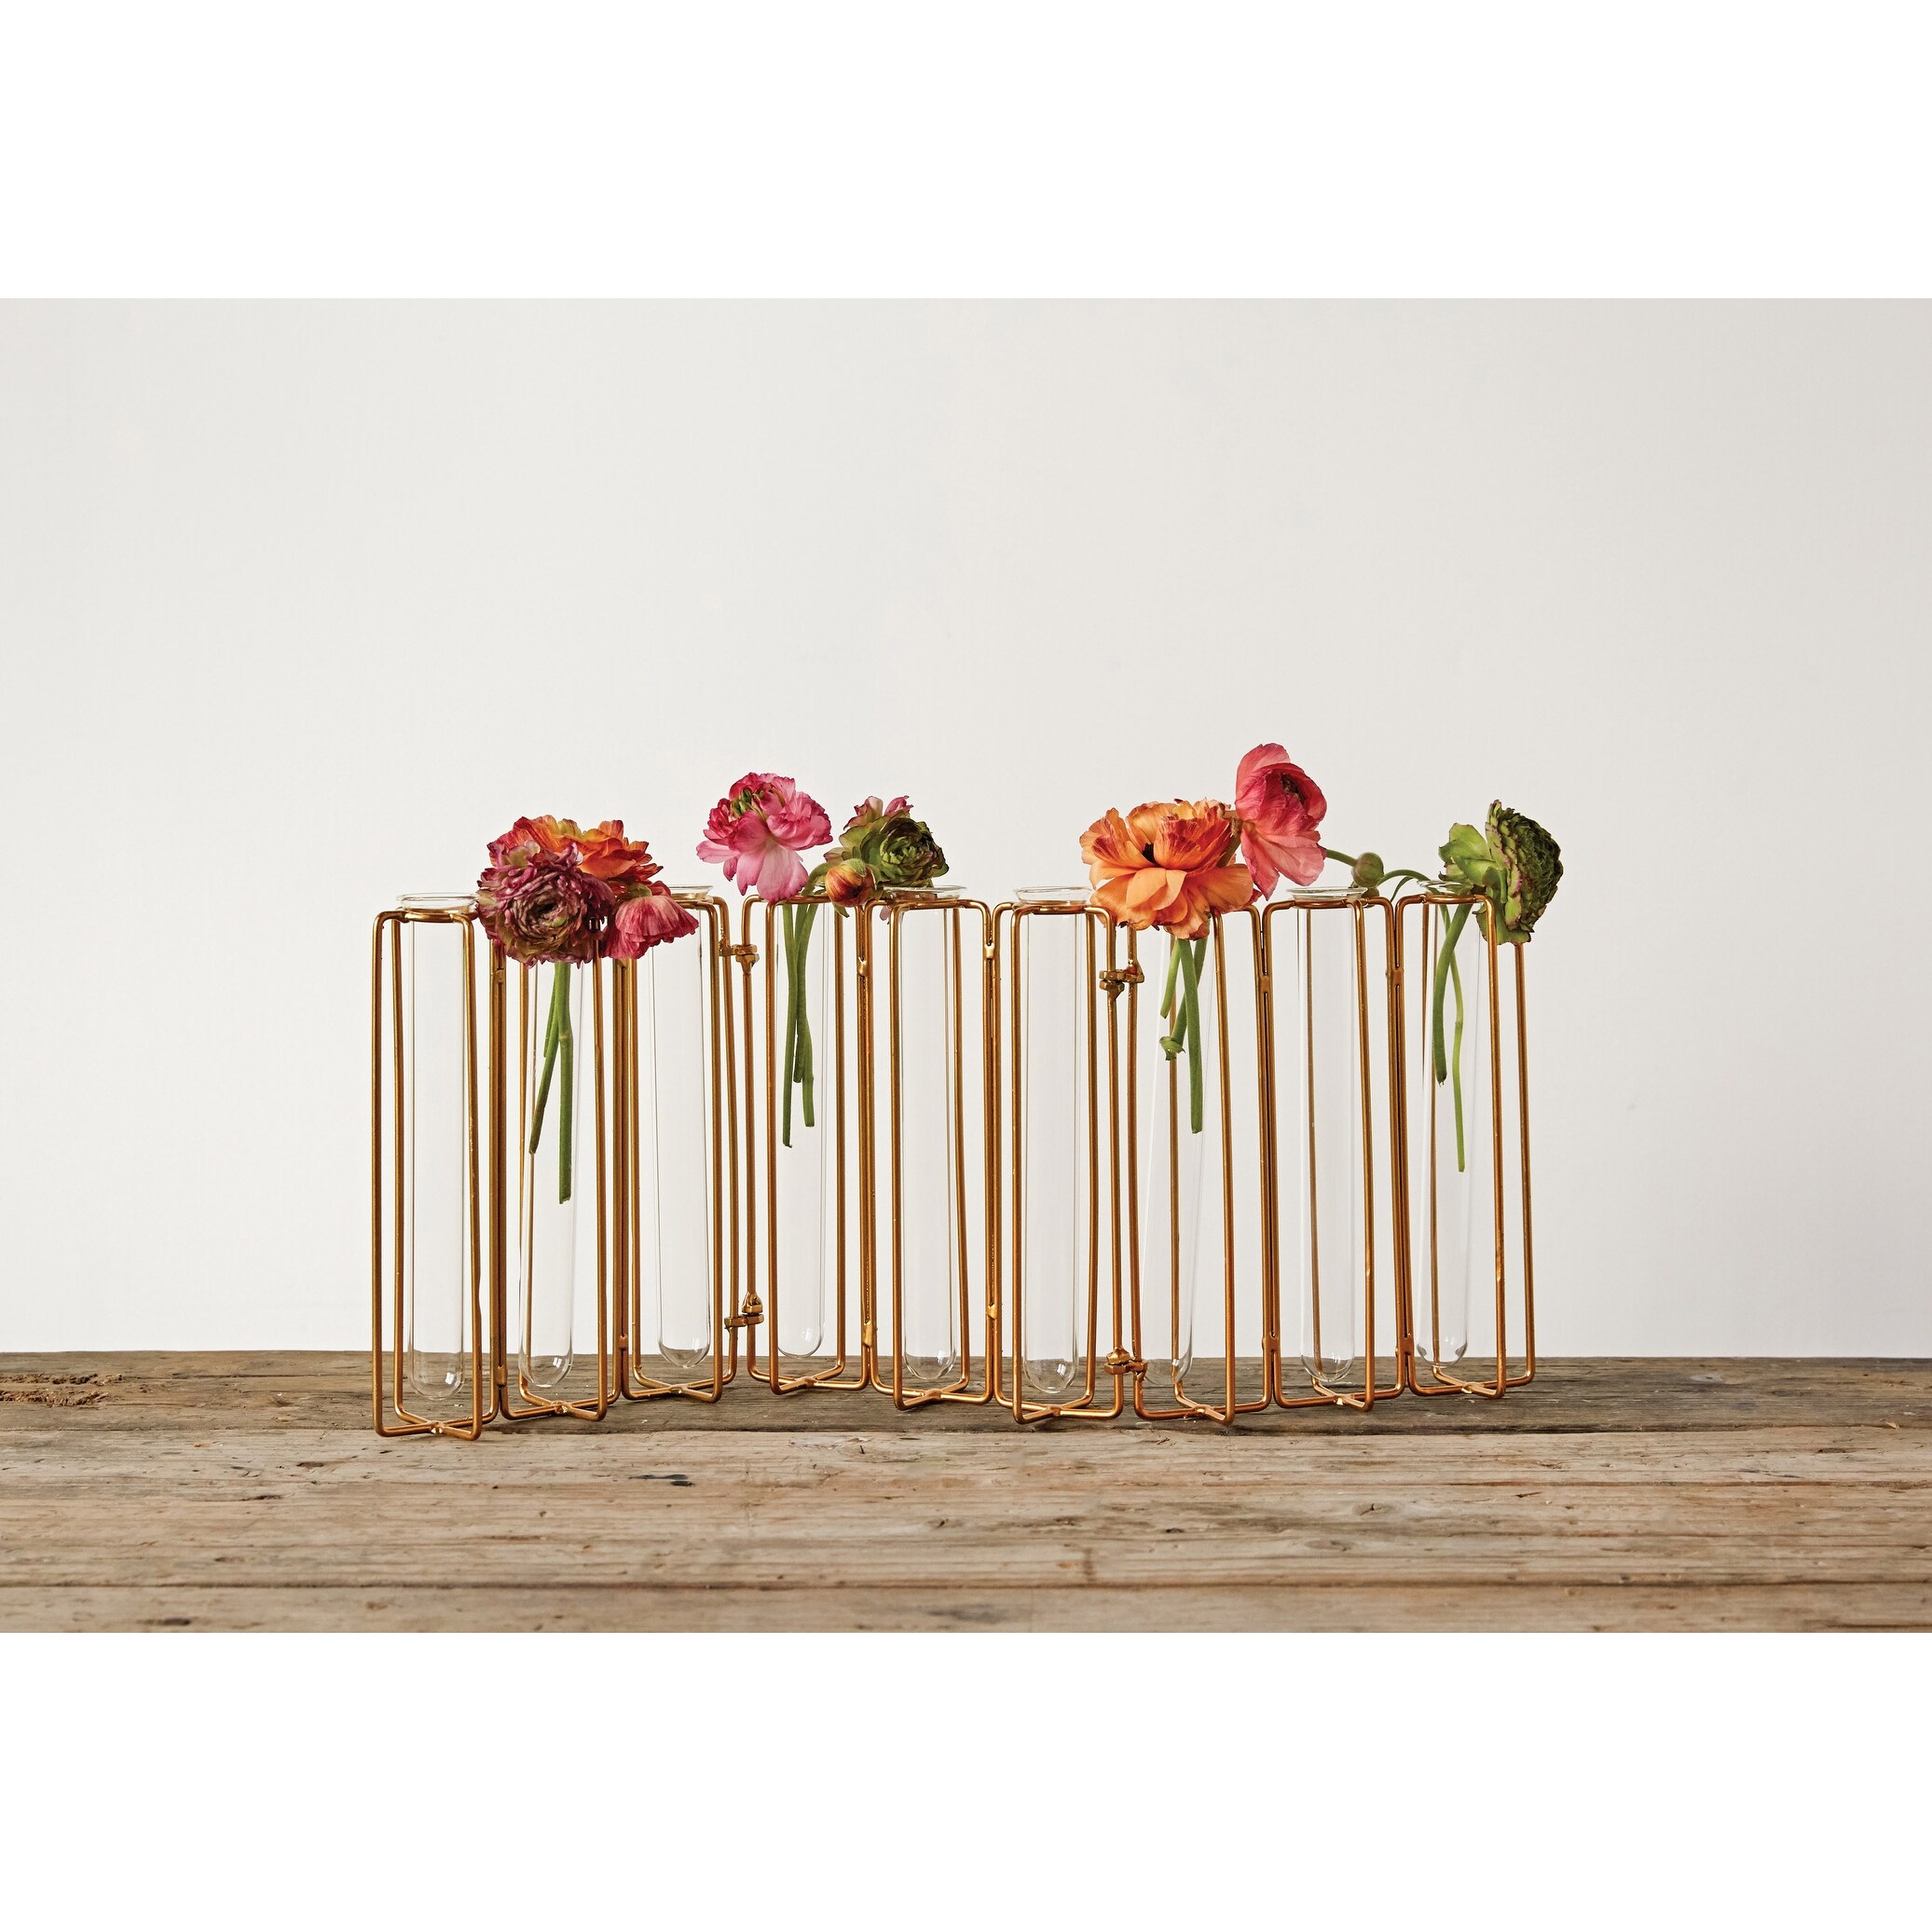 9 Test Tube Vases in a Single Gold Metal Stand